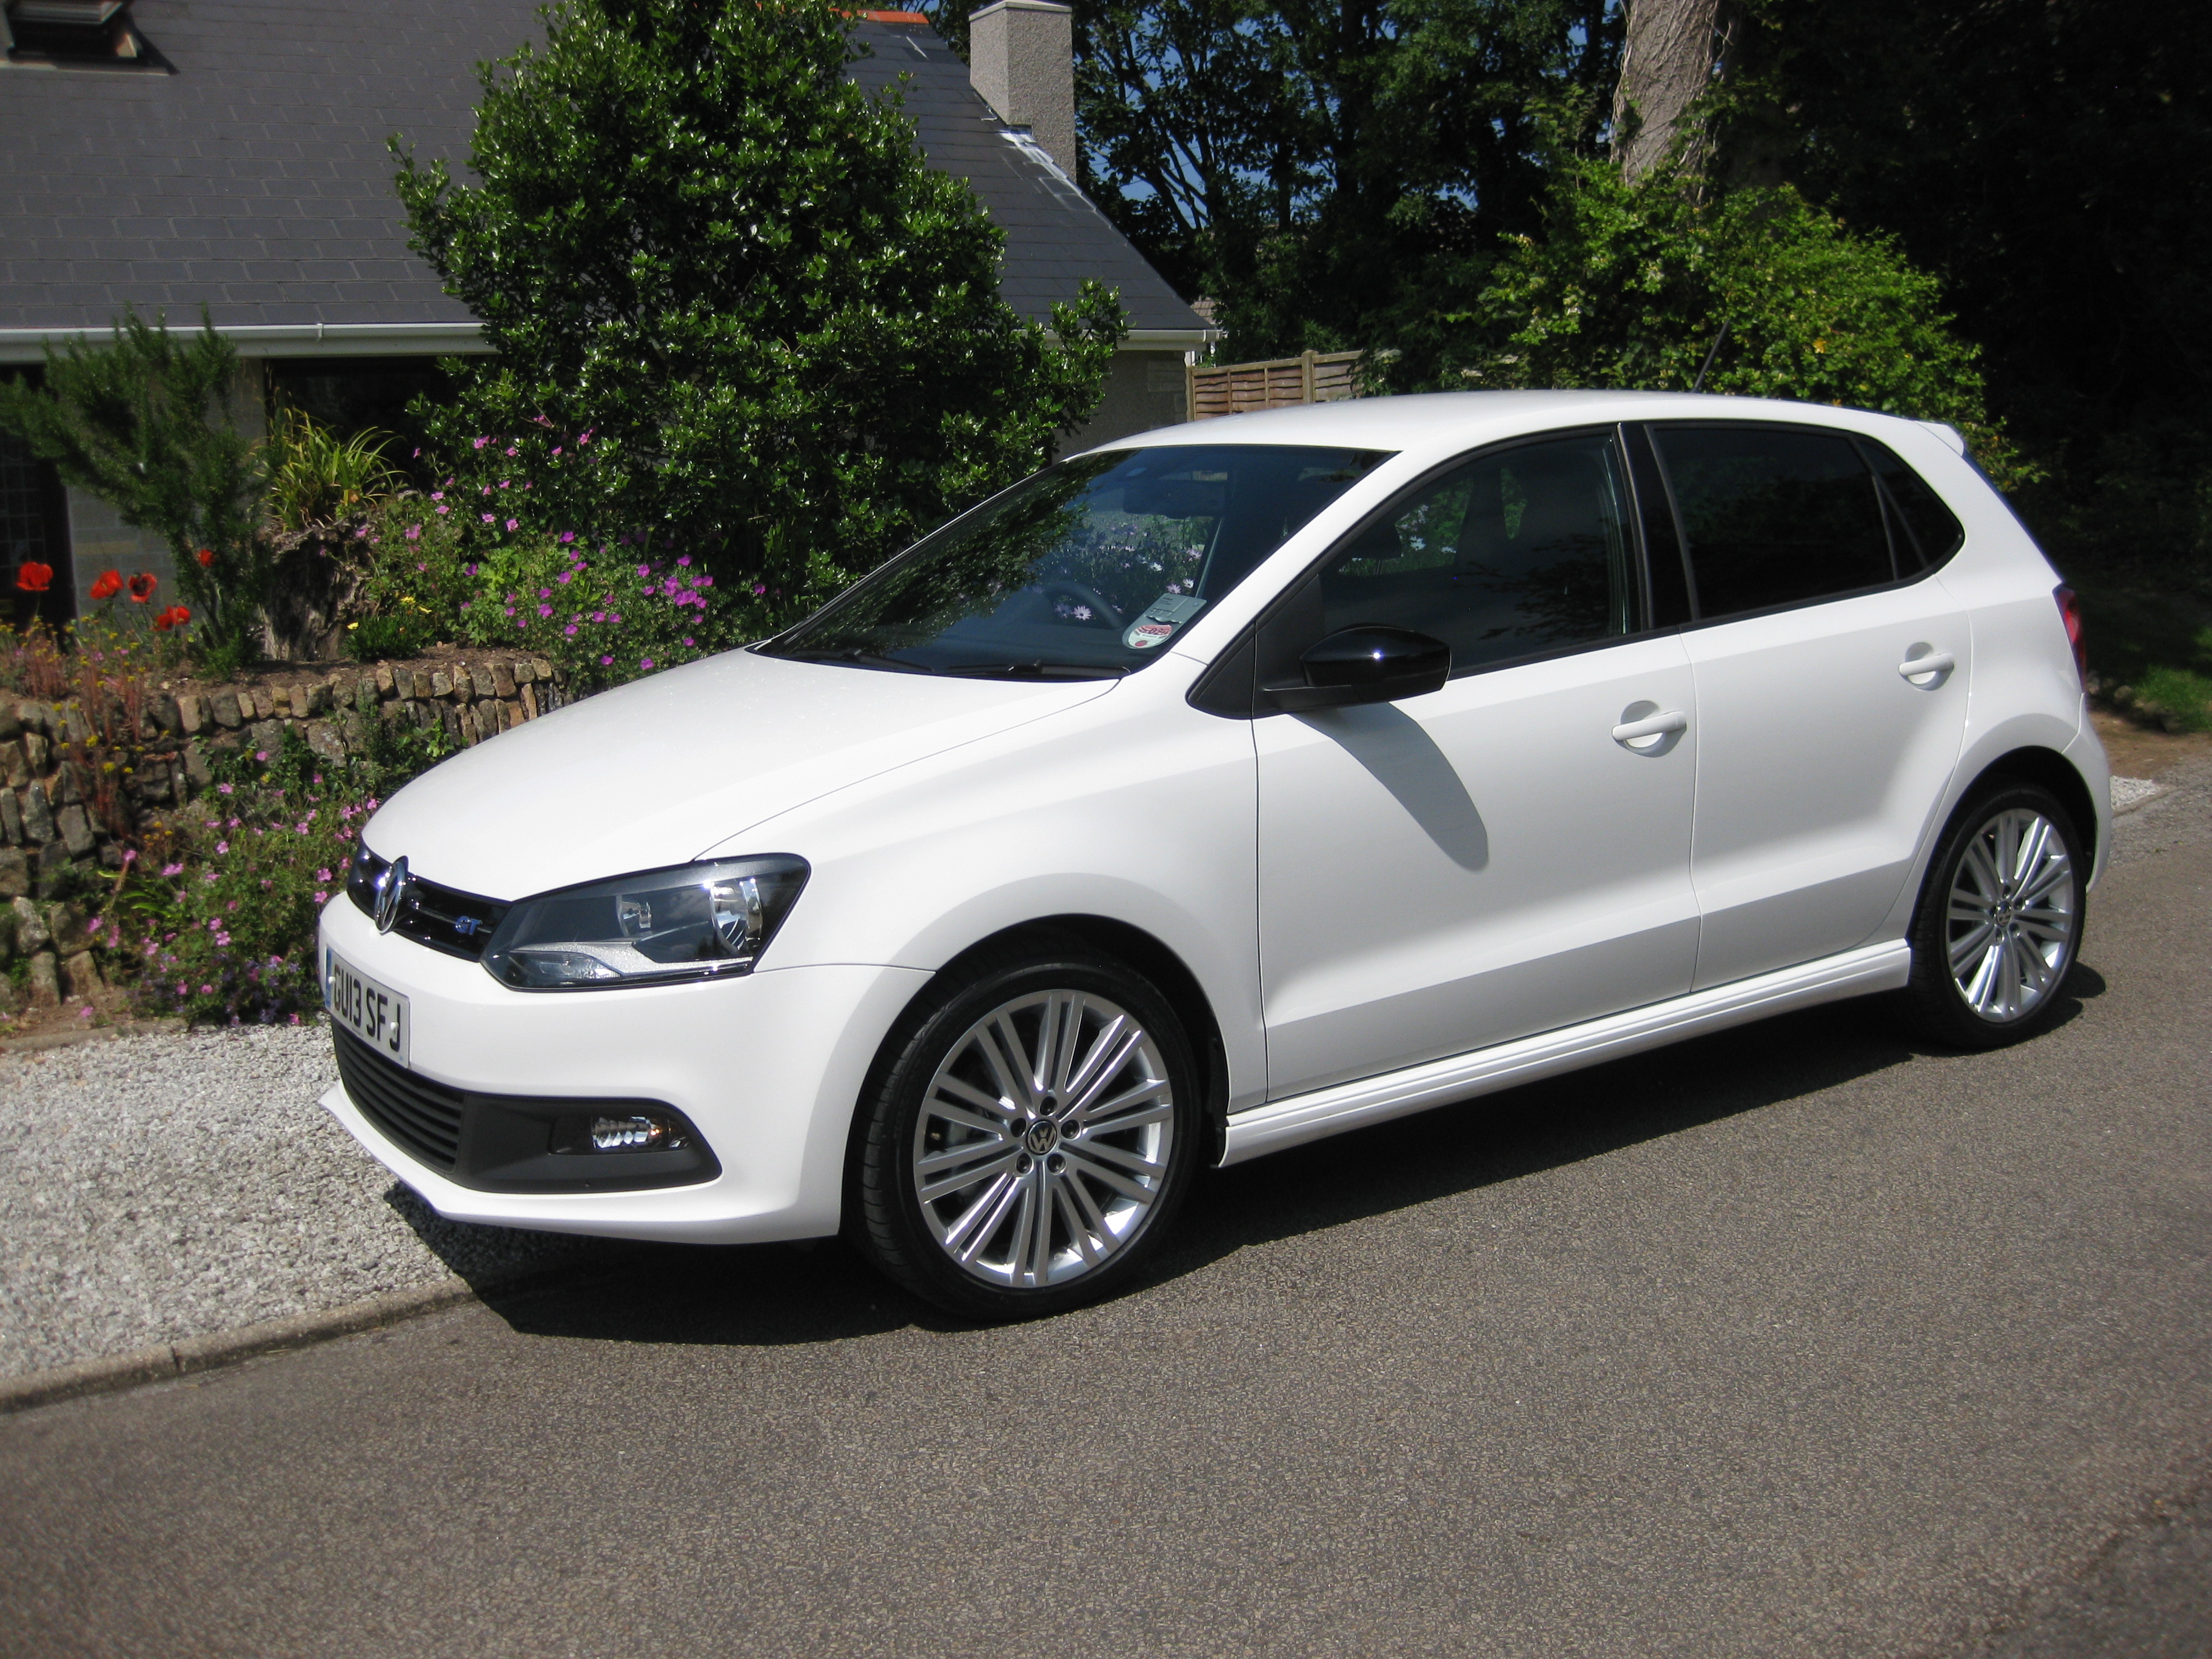 VW Polo Blue GT July 2013 (Copied to Disc) 007 (10).JPG